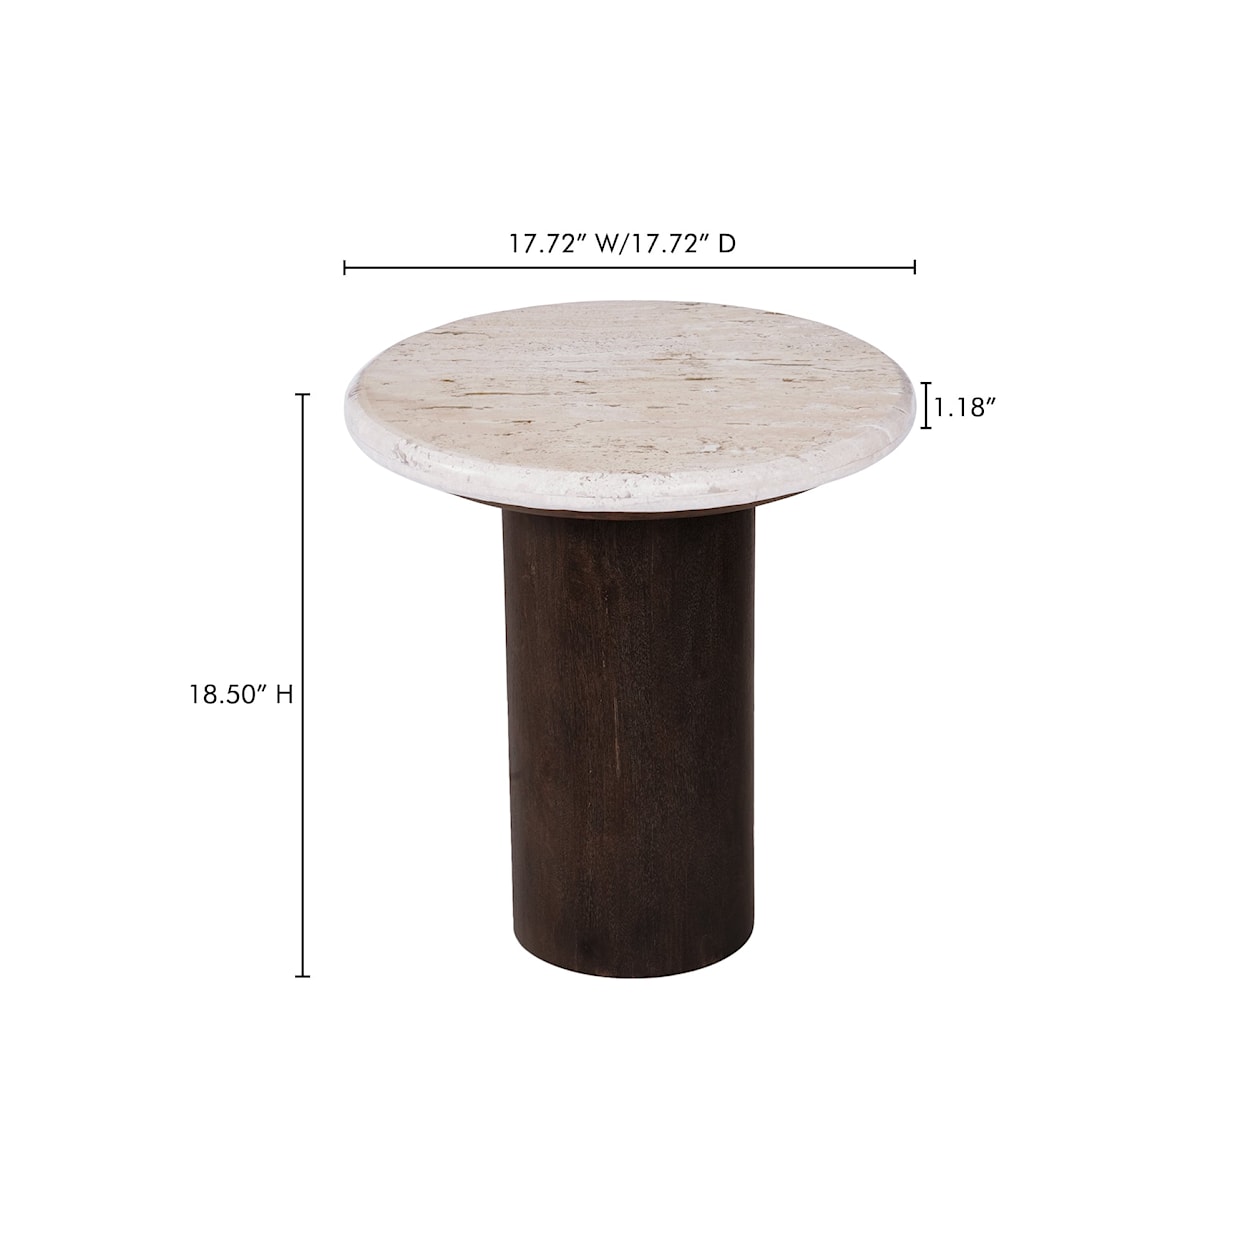 Moe's Home Collection Landon Accent Table